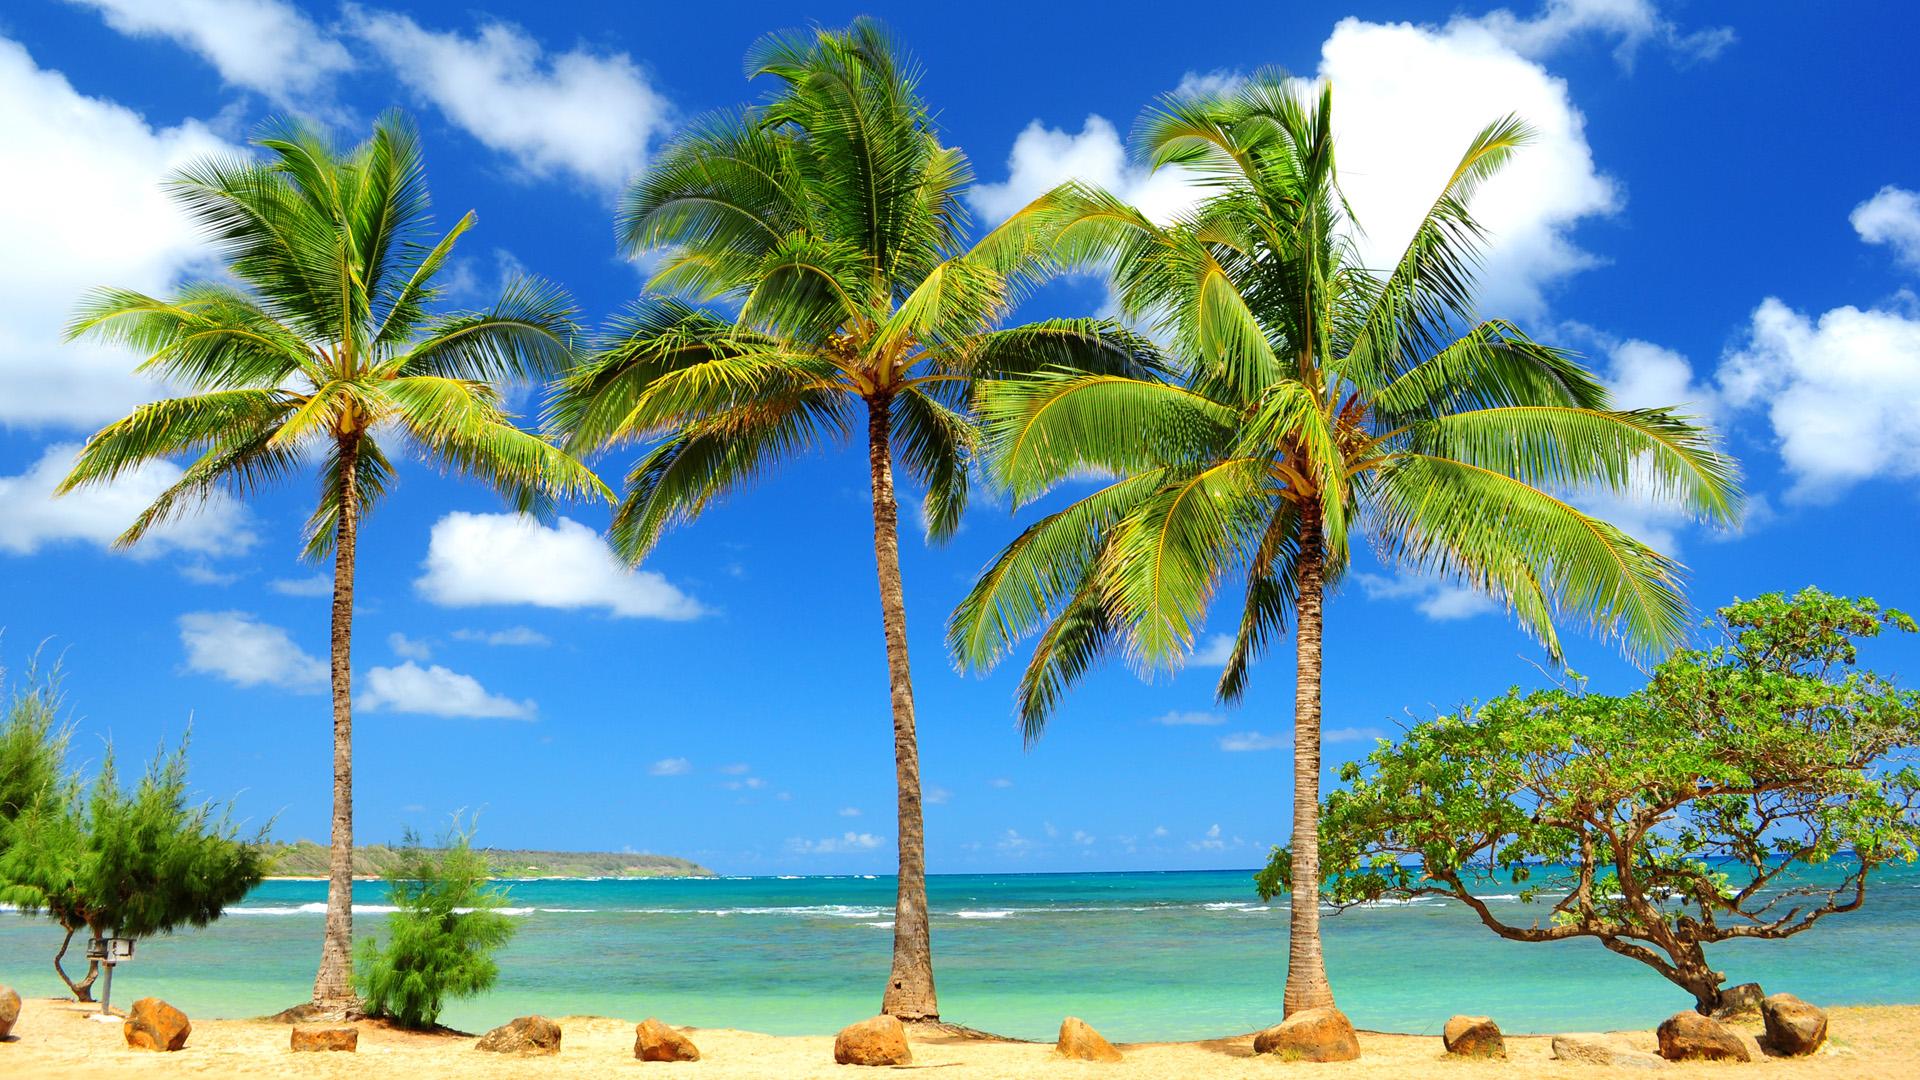 Caribbean Beach Wallpapers Free   My Wallz   Wallpapers free to